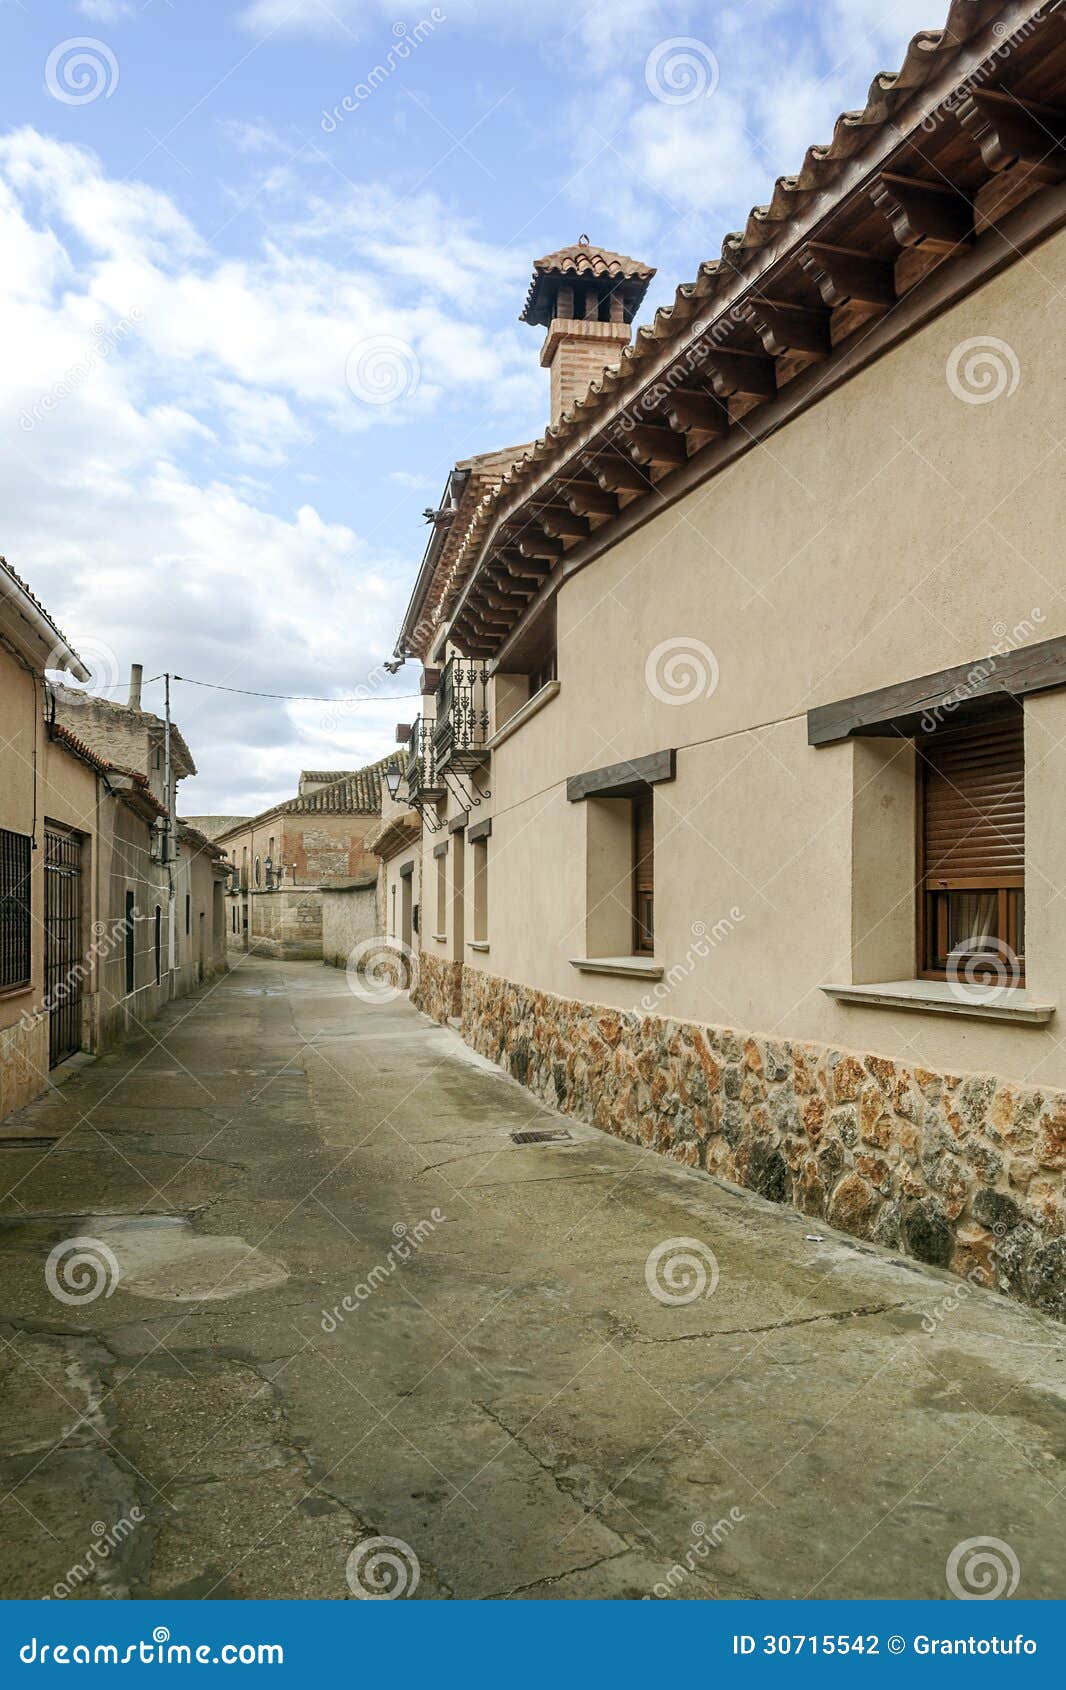 street with chimney in urueÃÂ±a